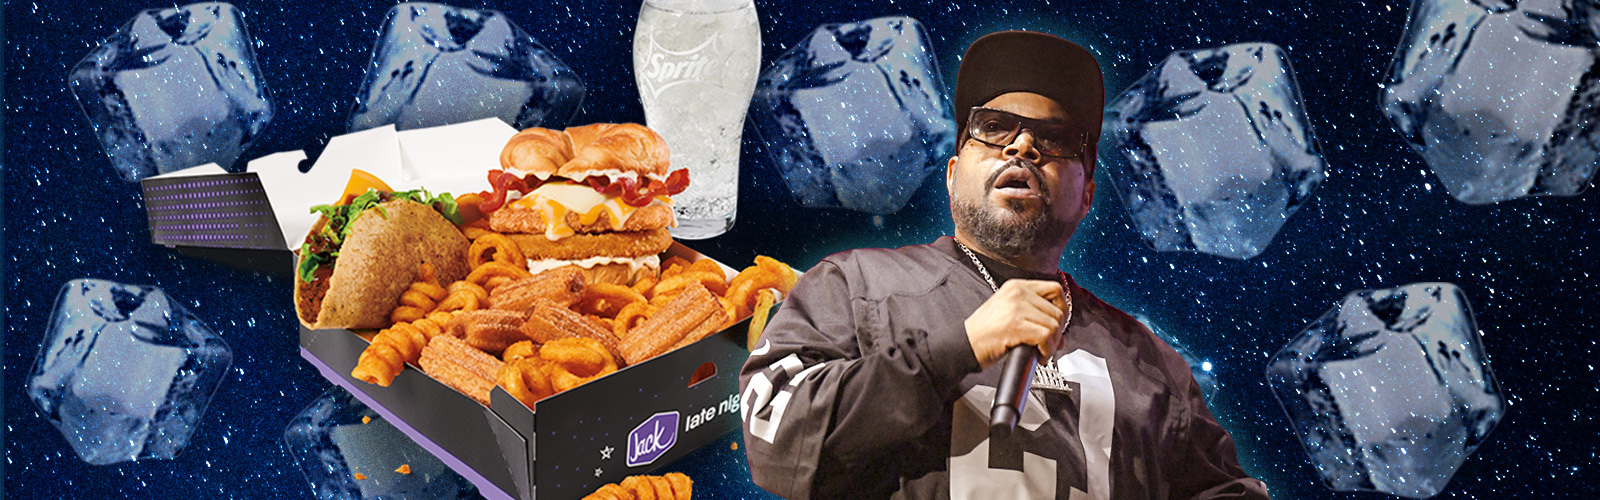 ice_cube_jack_in_the_box(1600x500)